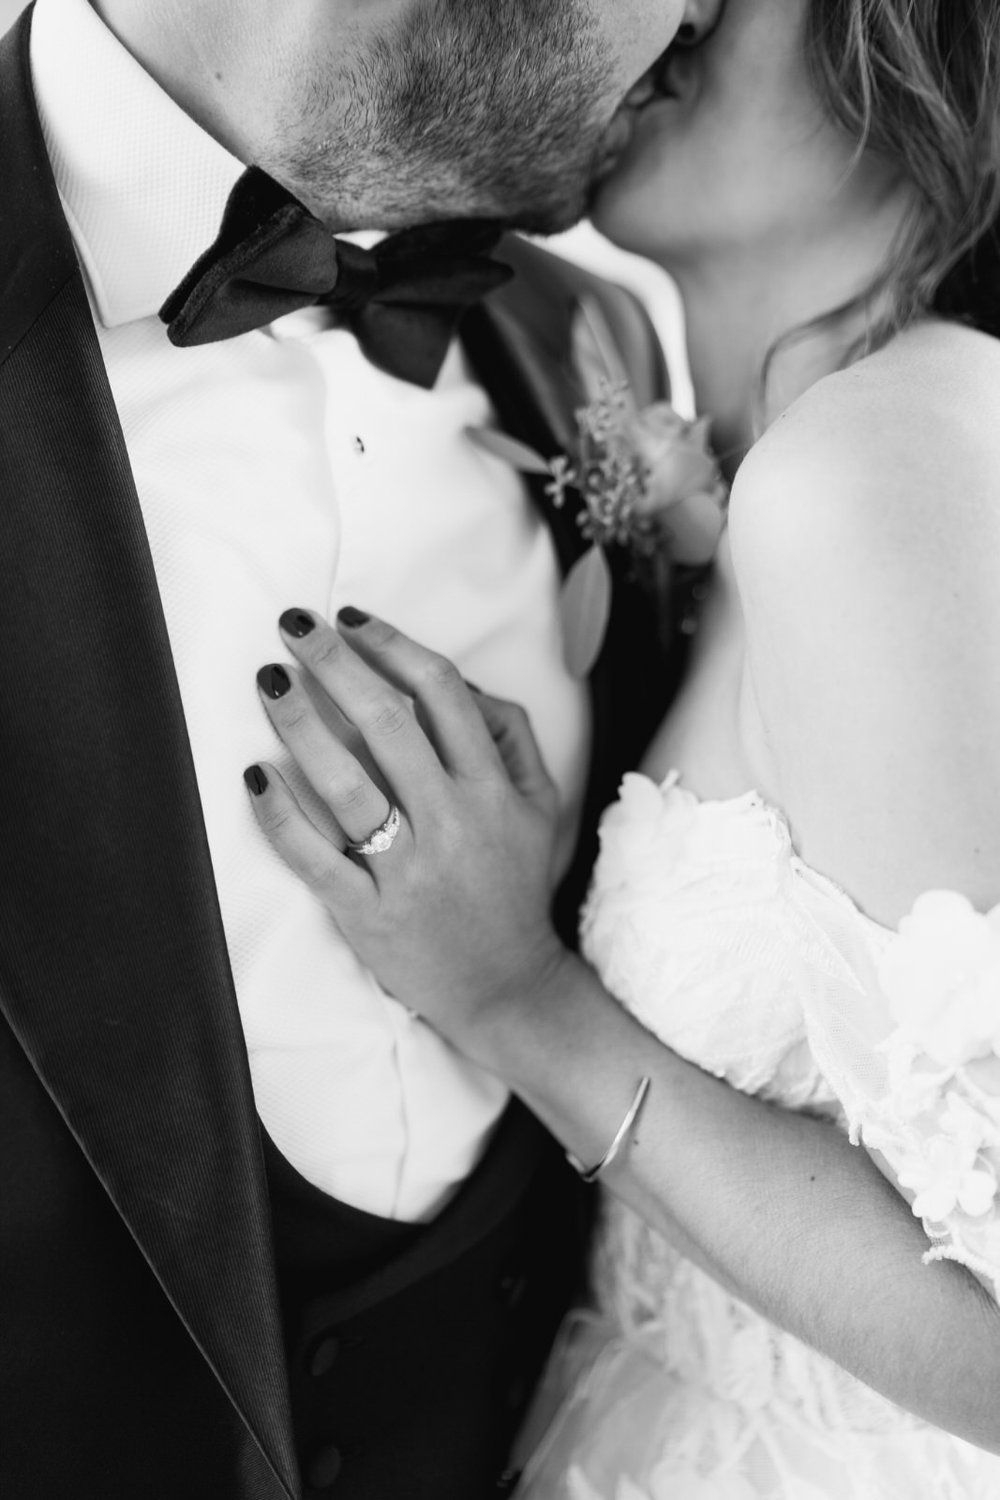 Close-up photograph of bride's left hand and wedding rings resting on groom's torso